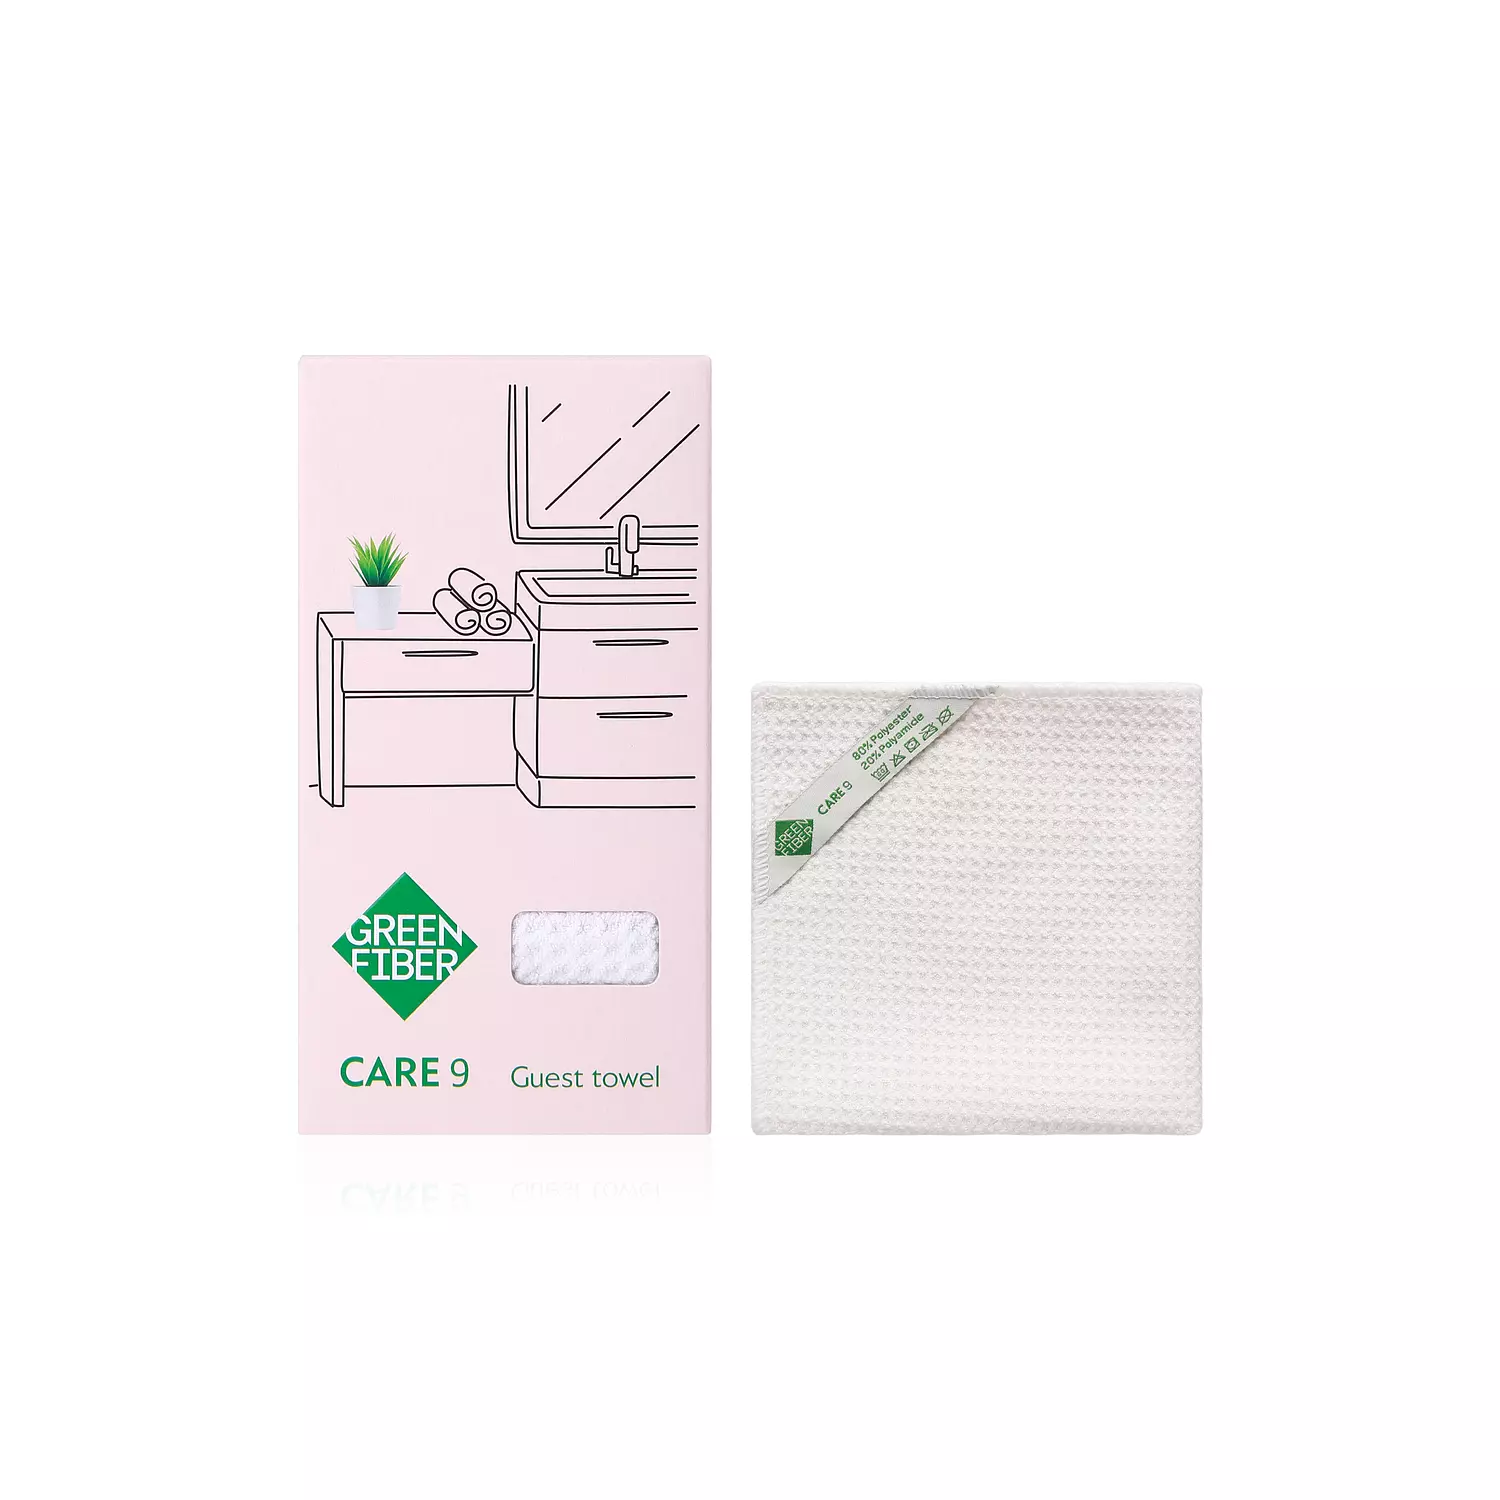 GREEN FIBER CARE 9 GUEST TOWEL WAFFLE GUEST TOWEL, MILKY hover image